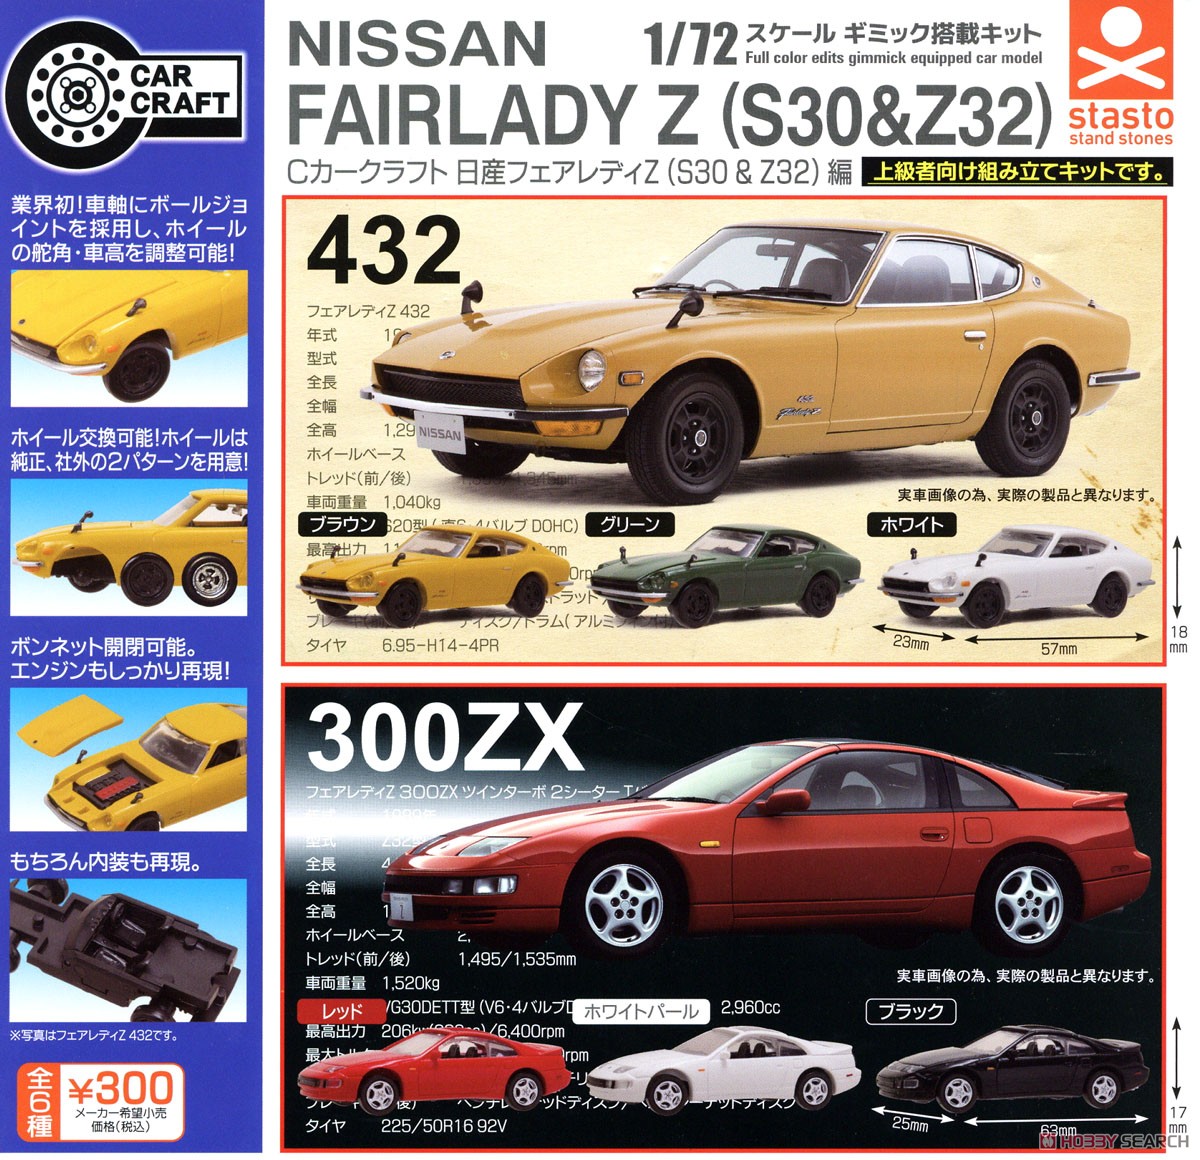 Cカークラフト 日産フェアレディZ (S30&Z32)編 (玩具) その他の画像2